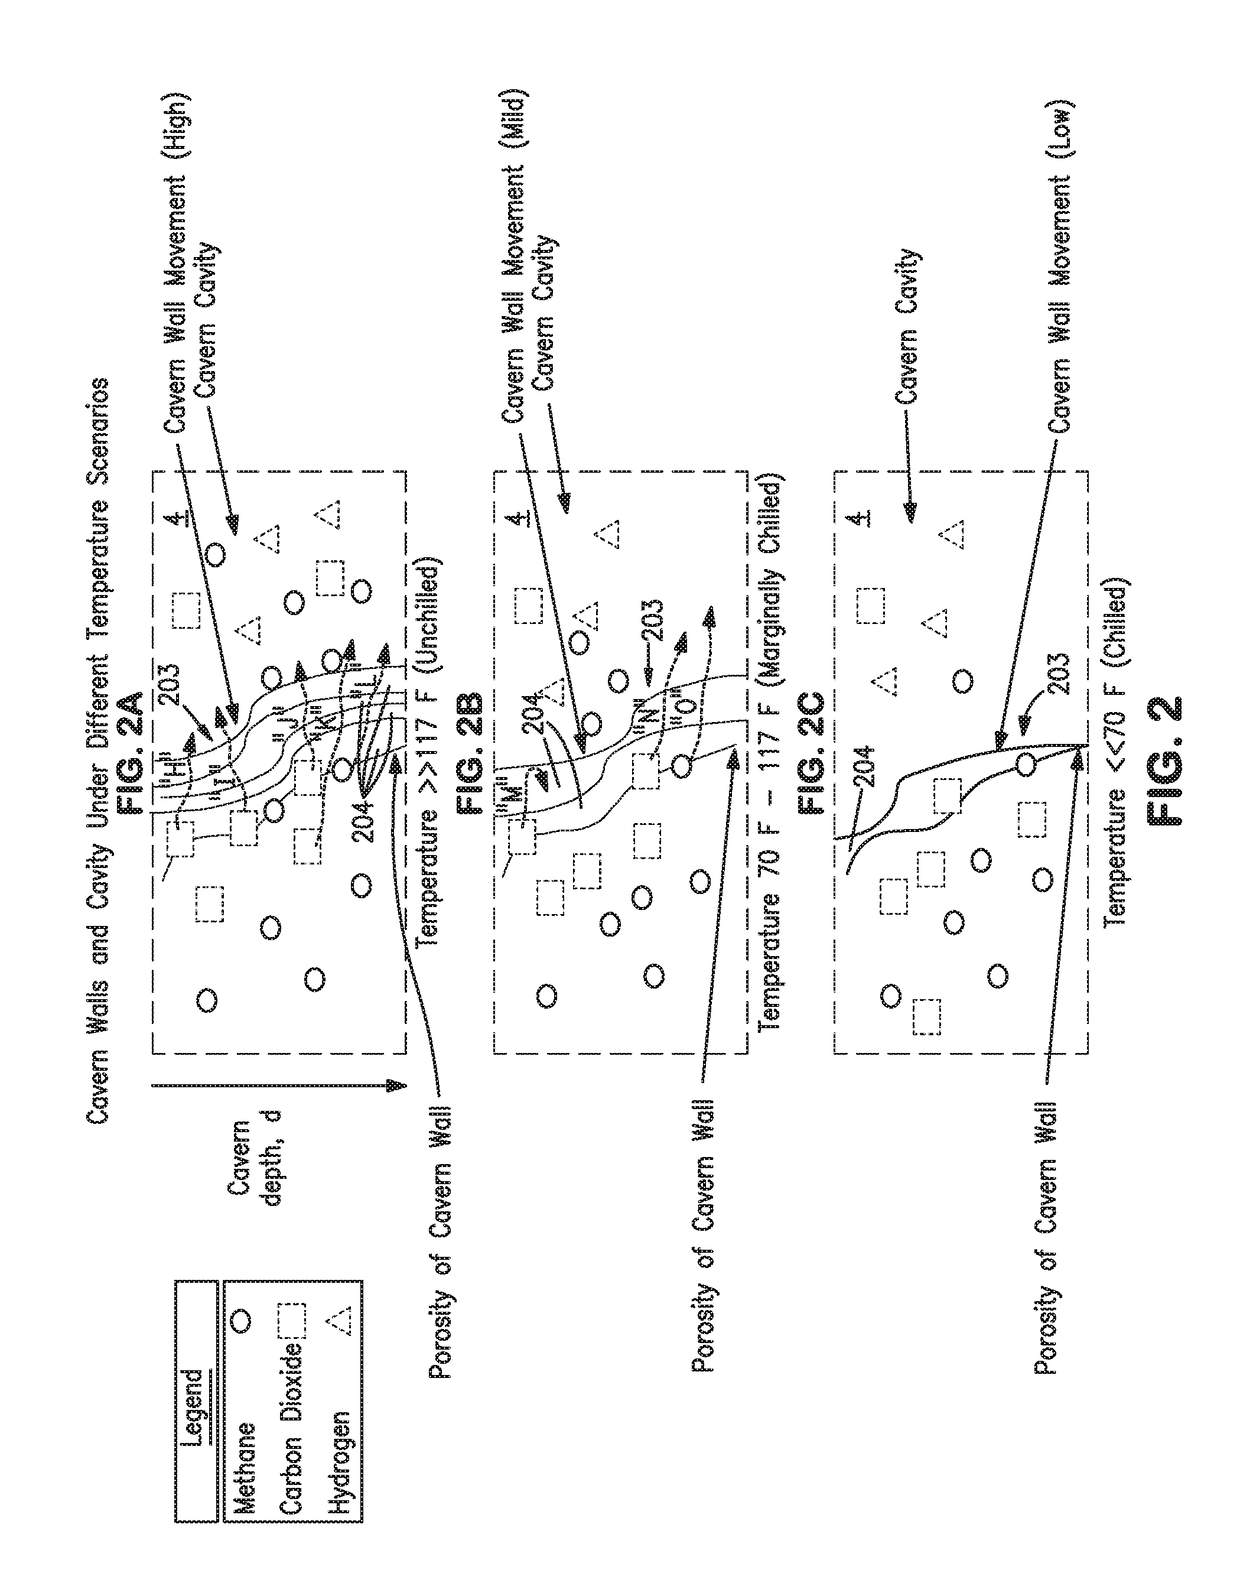 System and method for treating hydrogen to be stored in a salt cavern and supplying therefrom